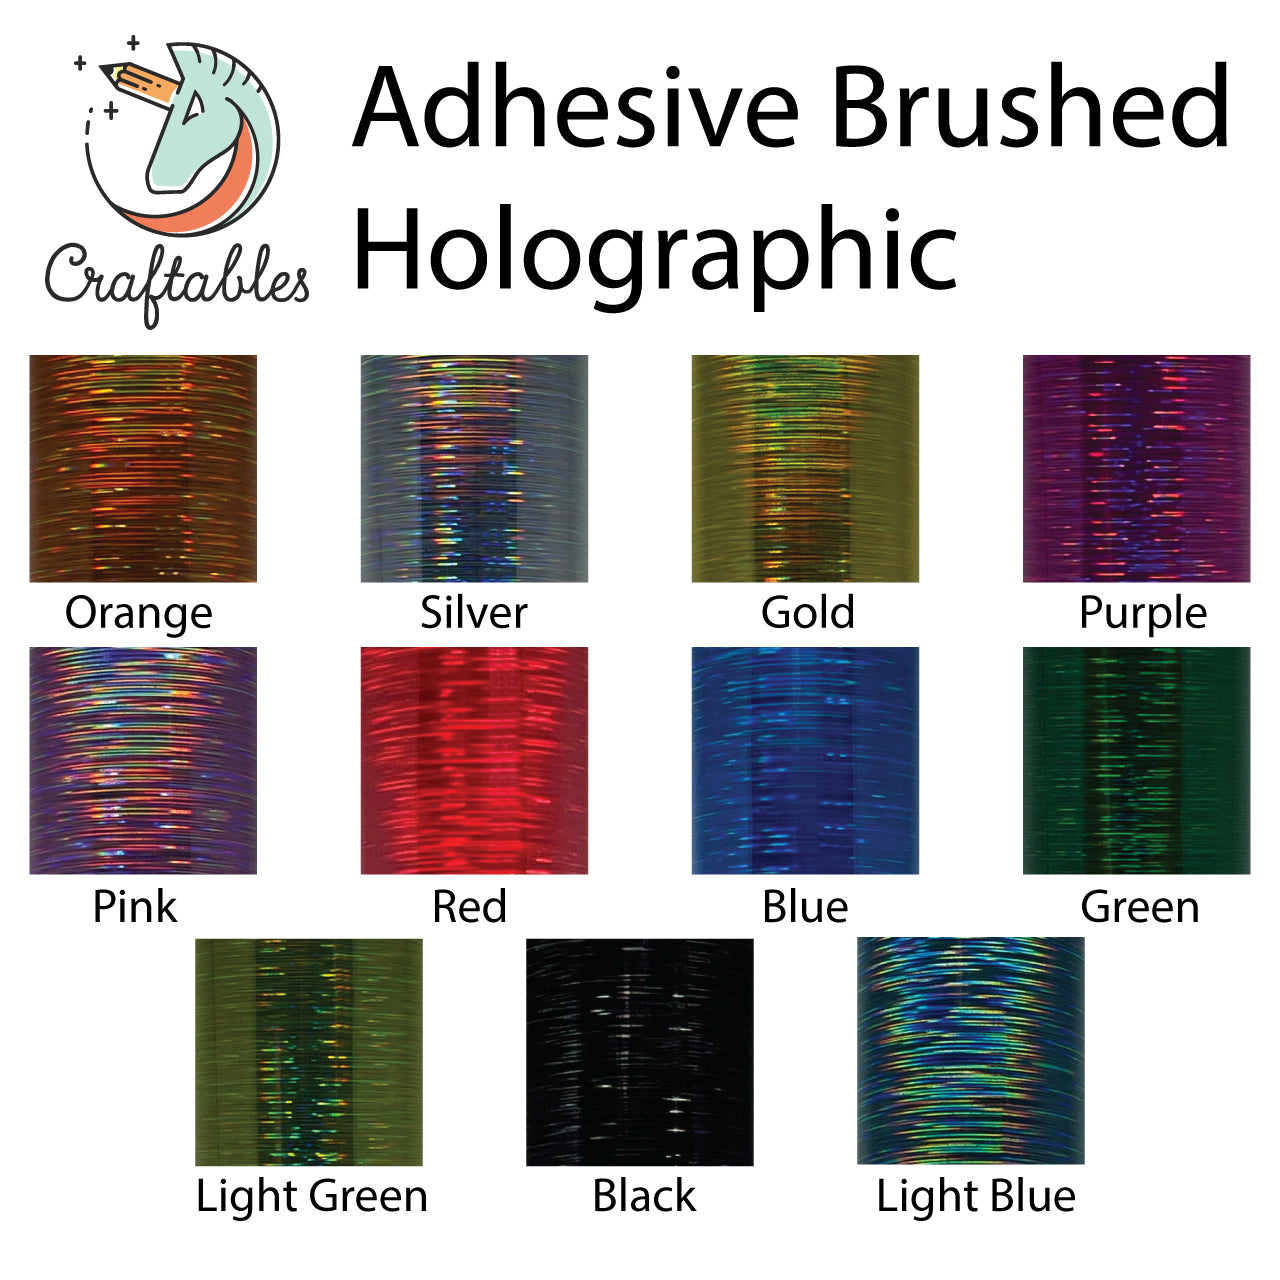 Black Brushed Holographic Adhesive Vinyl Sheets By Craftables